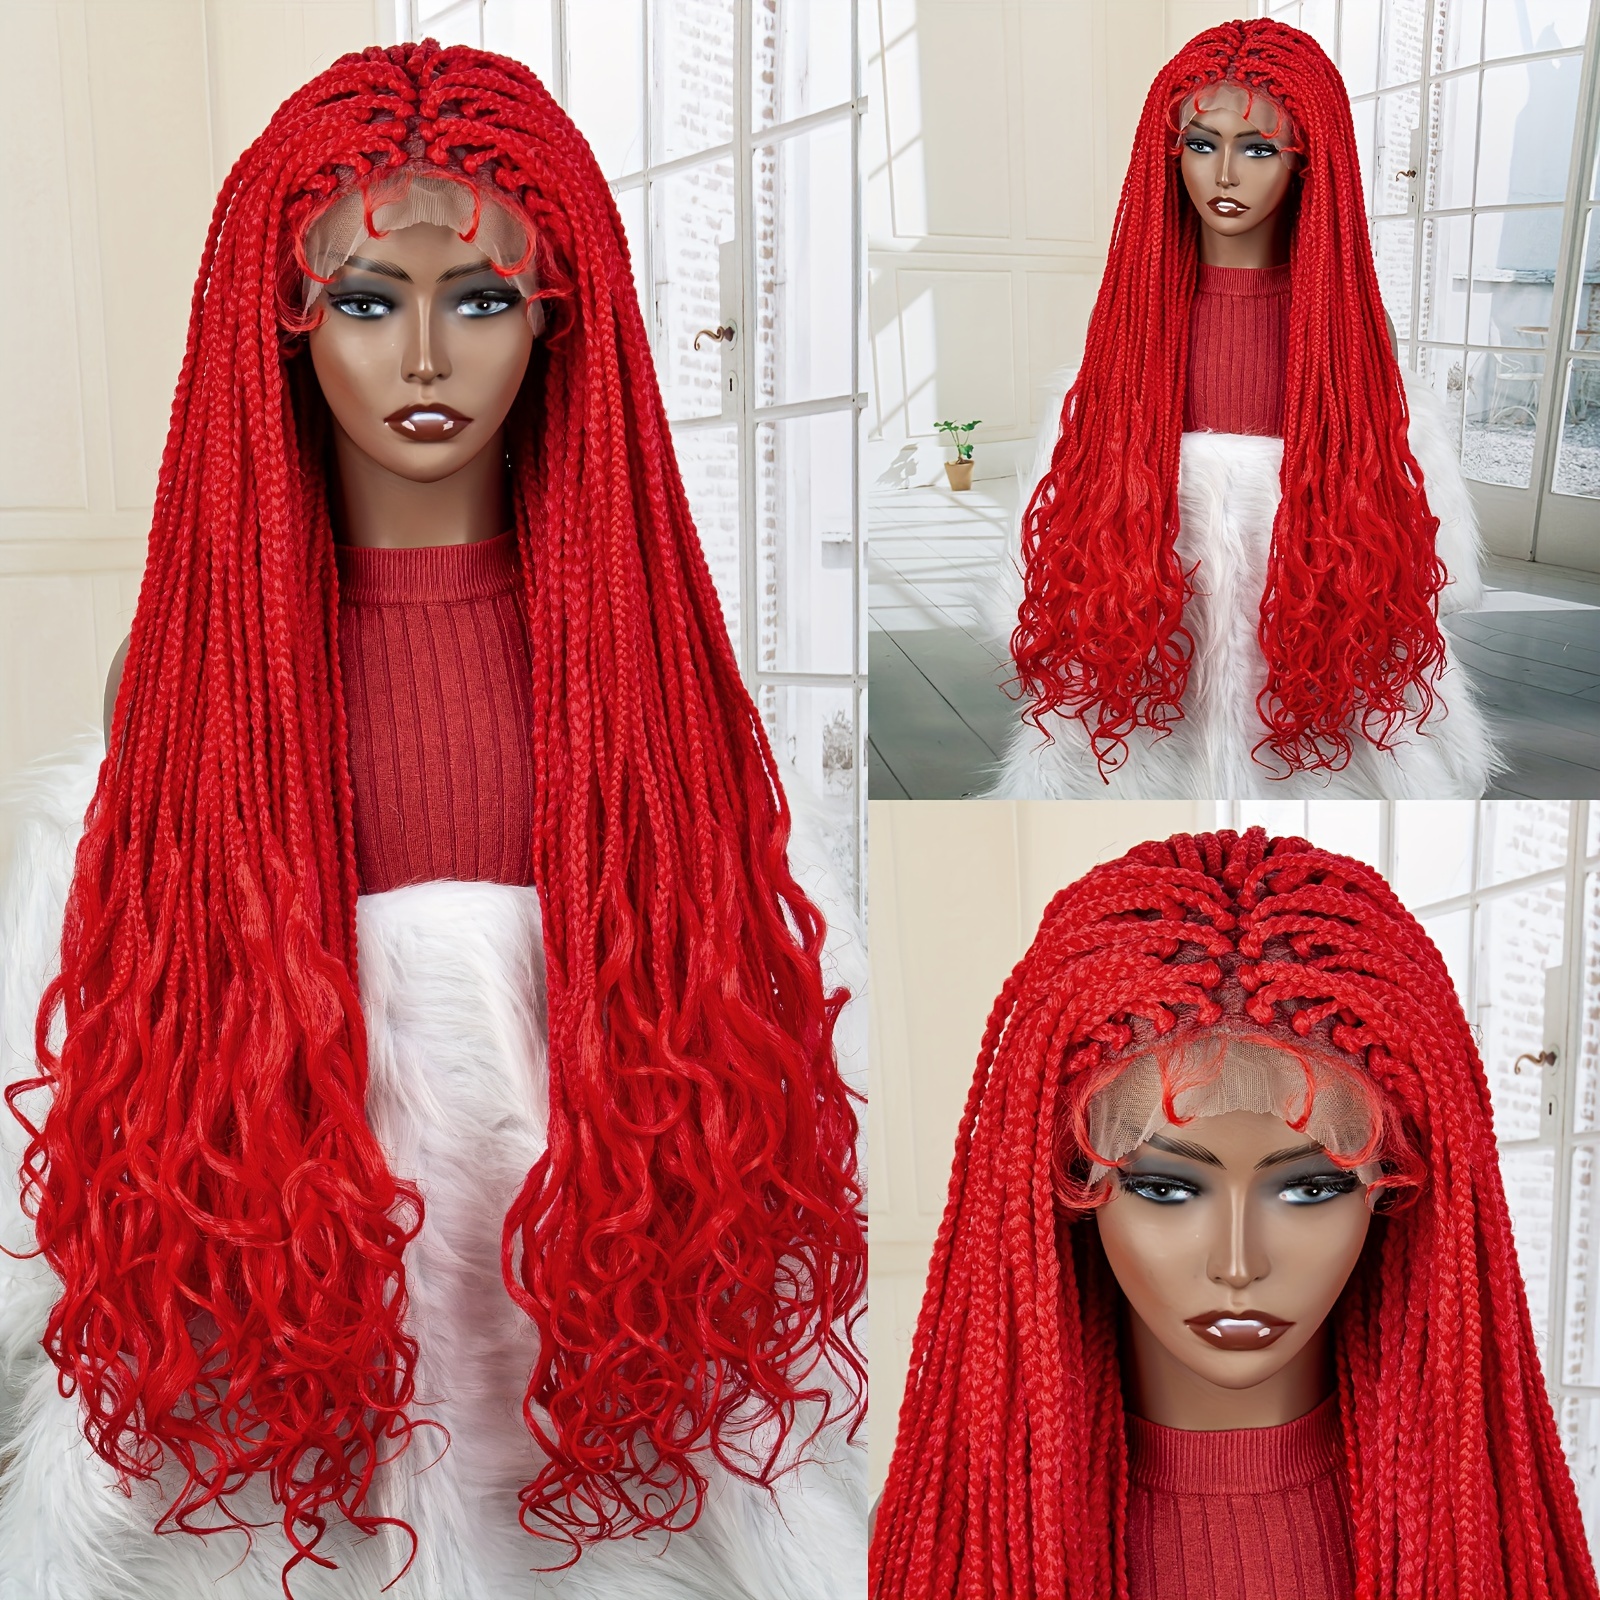 Braided Lace Wigs Baby Hair  Braid Wigs Lace Front Wig